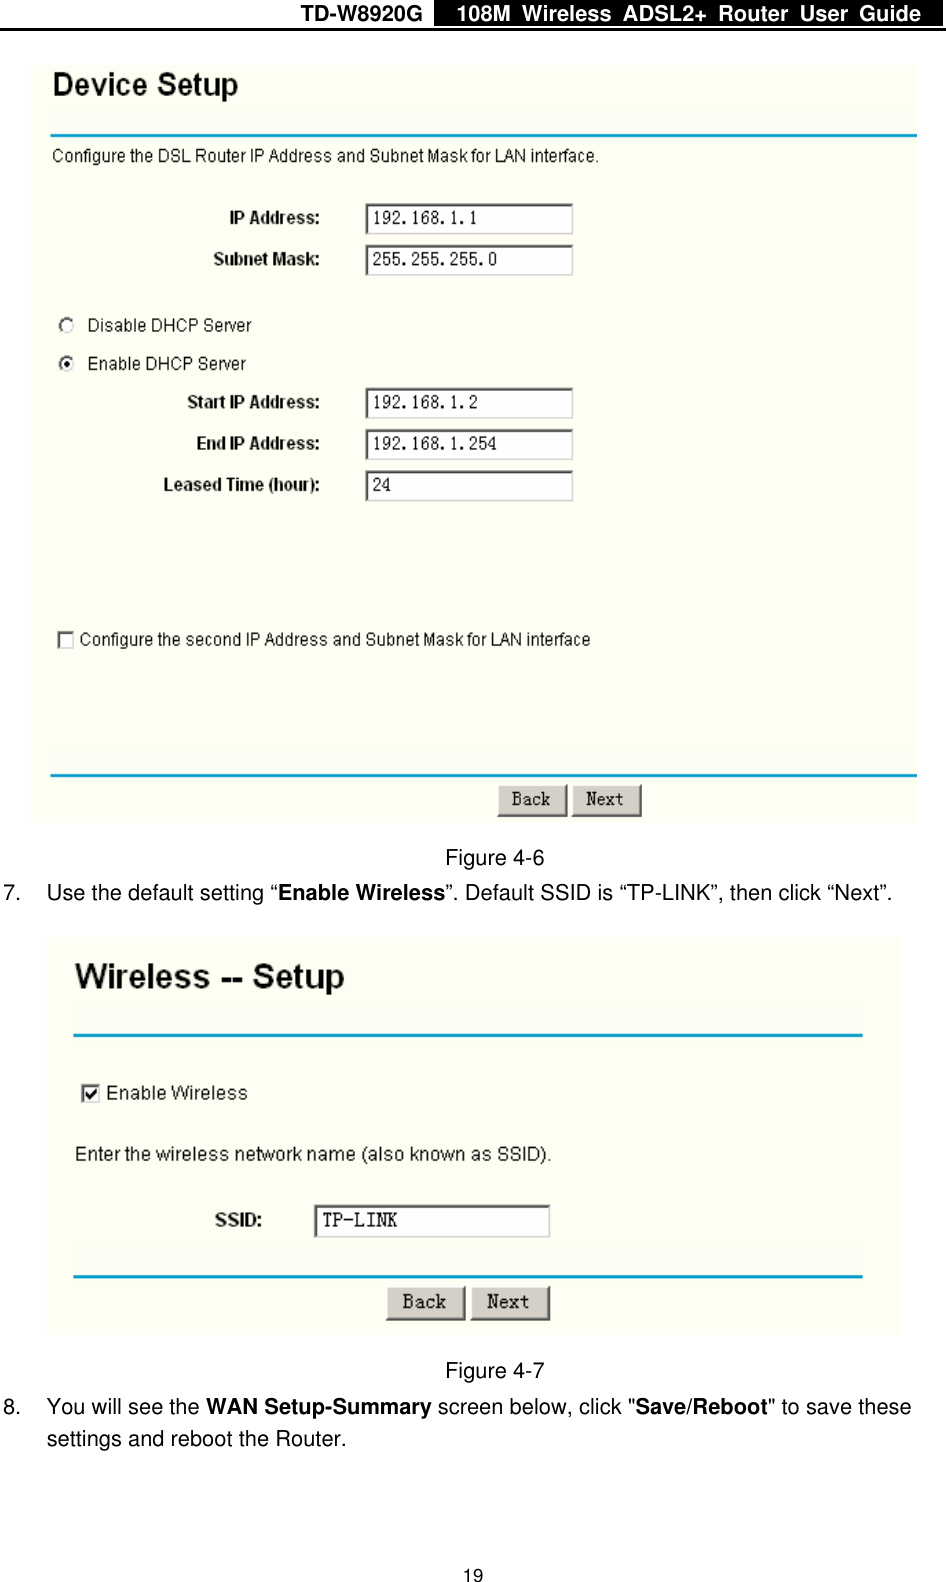 TD-W8920G    108M Wireless ADSL2+ Router User Guide    19 Figure 4-6 7.  Use the default setting “Enable Wireless”. Default SSID is “TP-LINK”, then click “Next”.  Figure 4-7 8.  You will see the WAN Setup-Summary screen below, click &quot;Save/Reboot&quot; to save these settings and reboot the Router. 